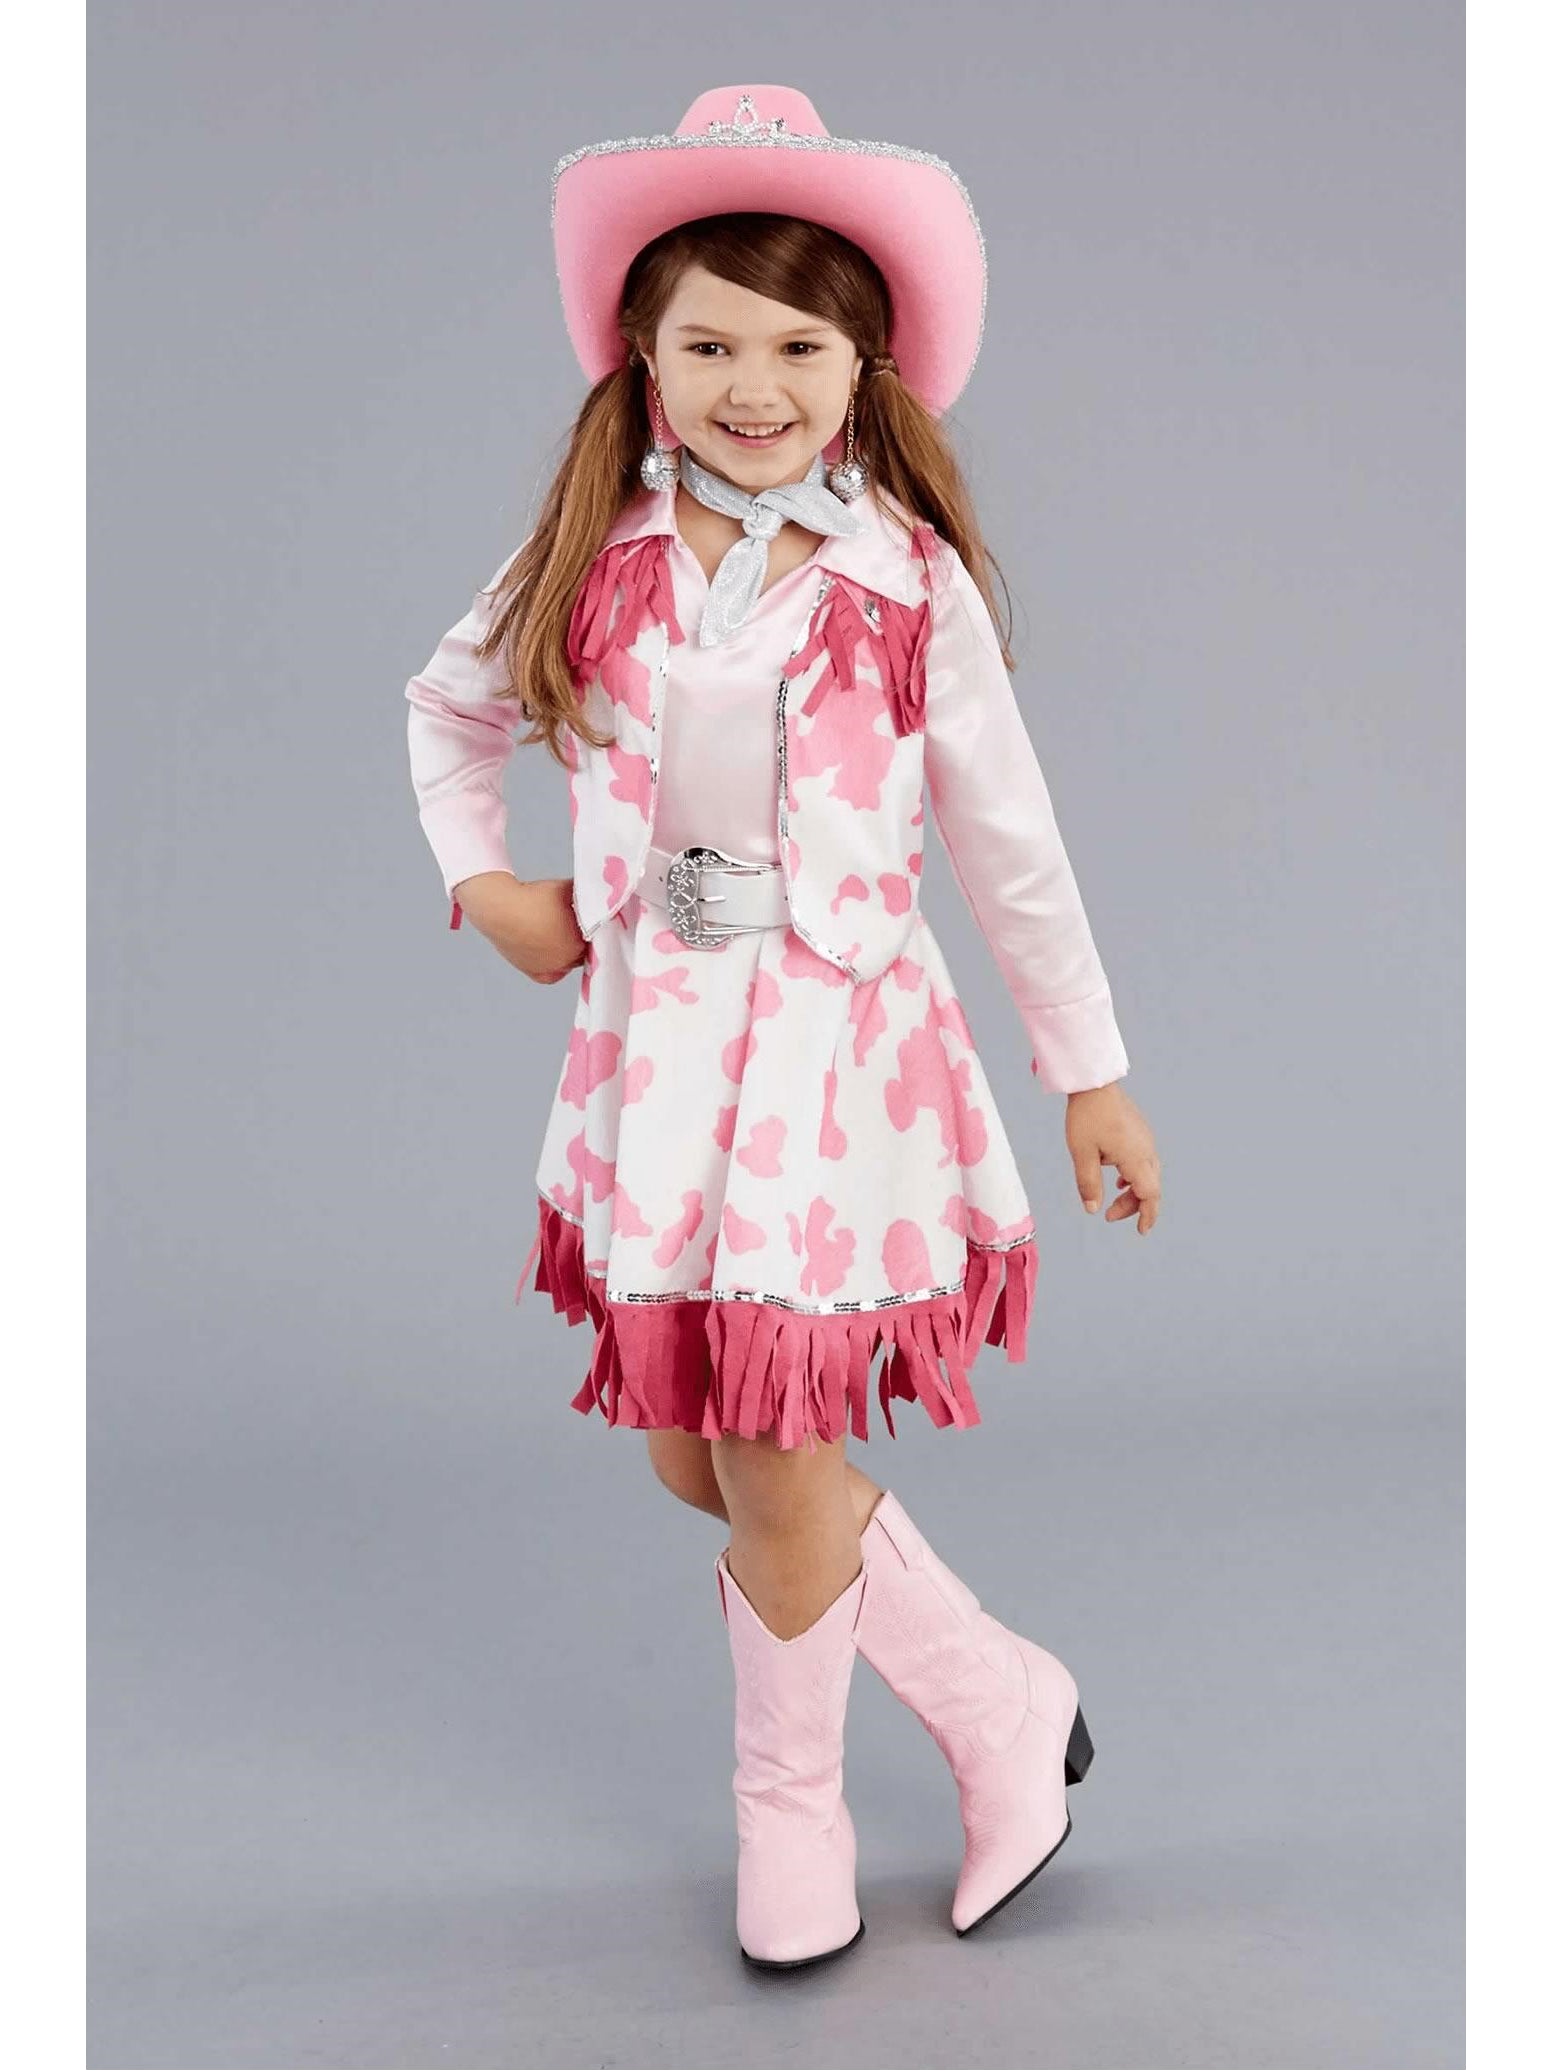 pink cowgirl dress